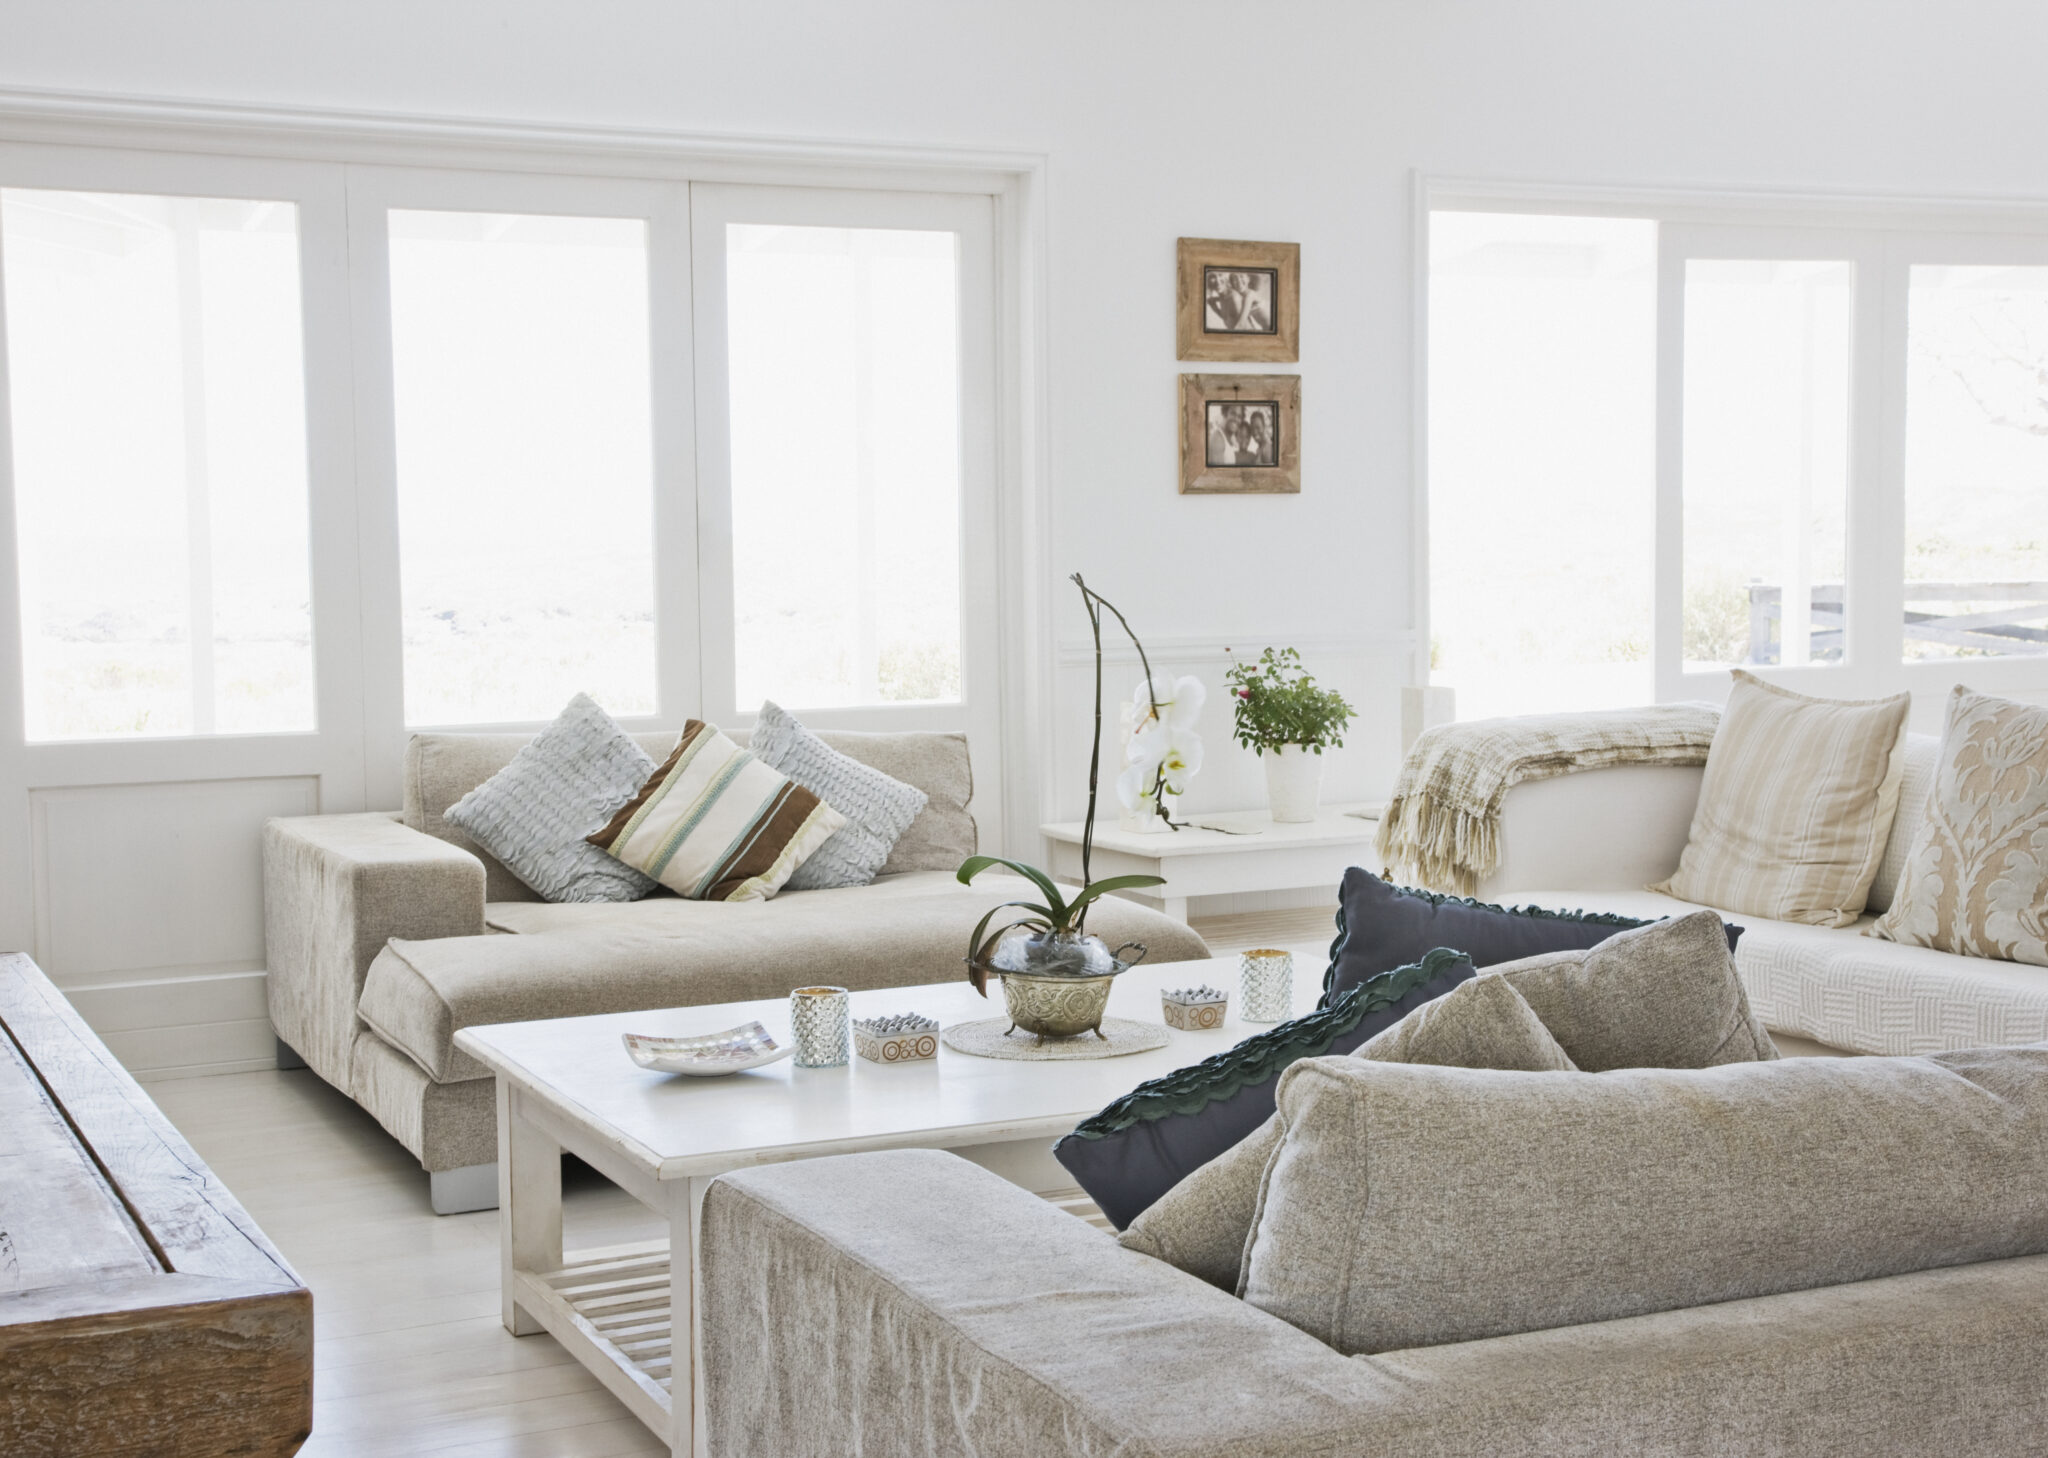 10 Quick Tips to Get a Wow Factor when Decorating with All-White Color